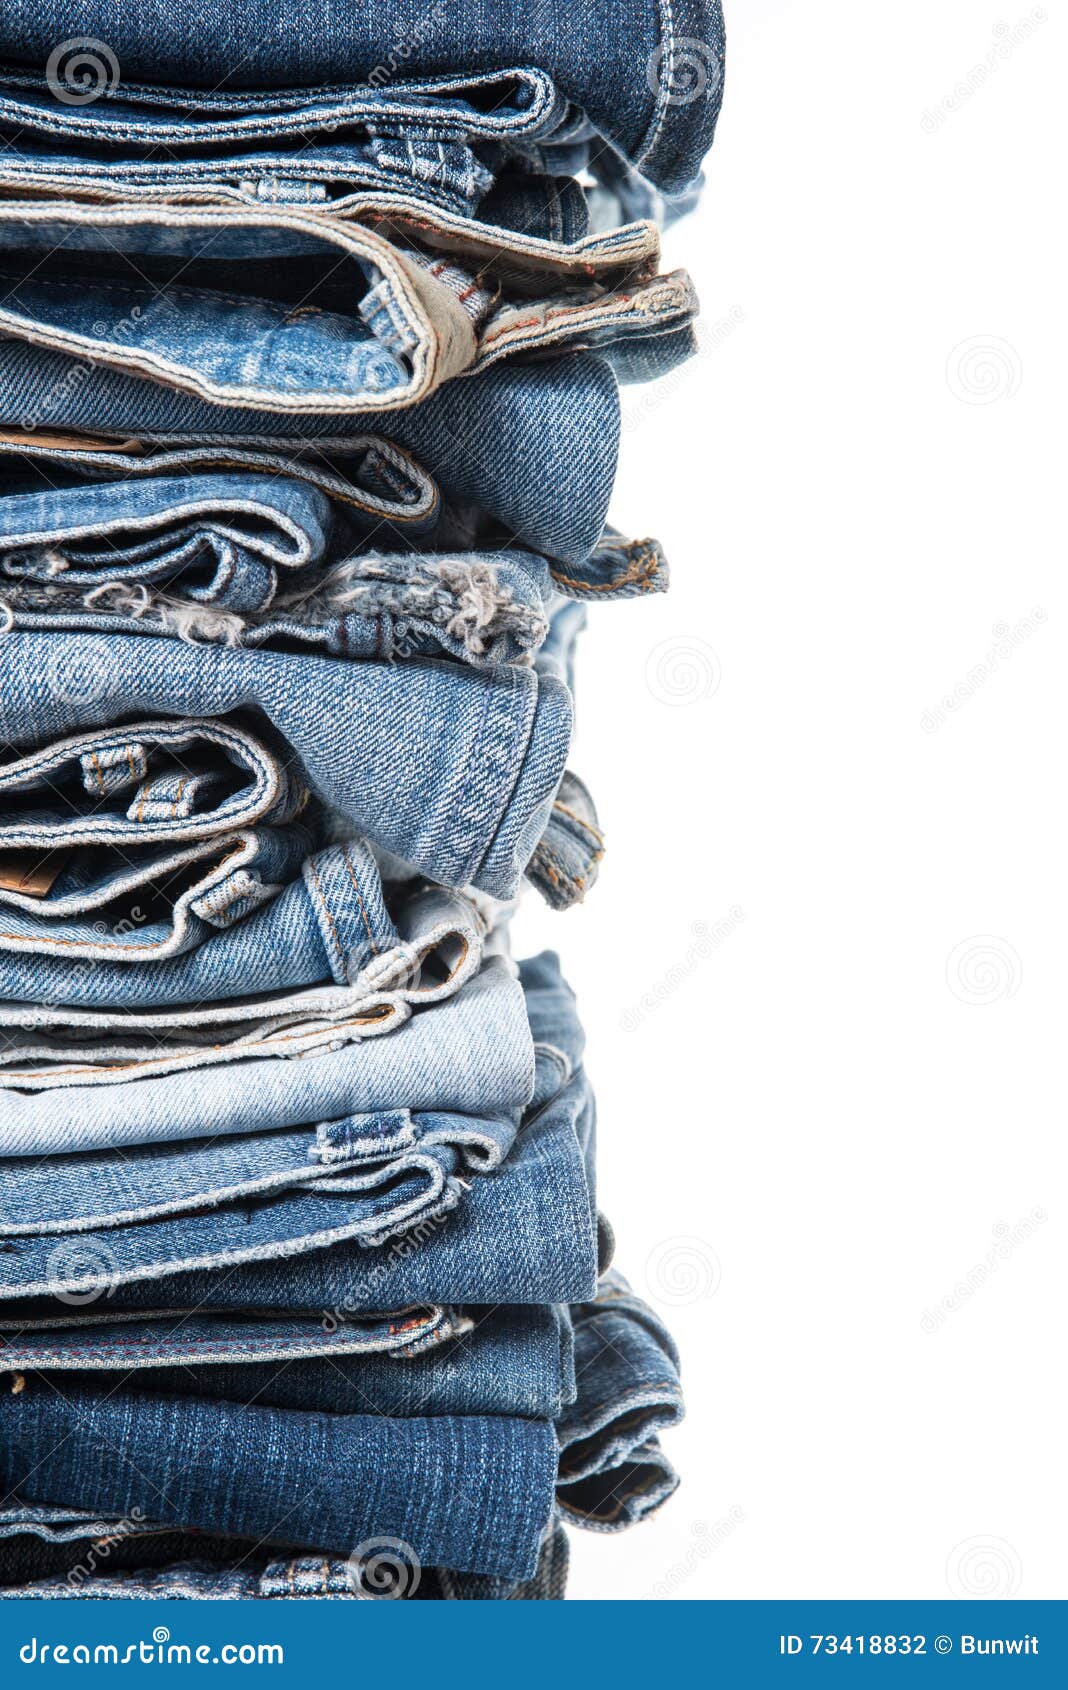 Stack of Jeans on White Background Stock Photo - Image of trousers ...